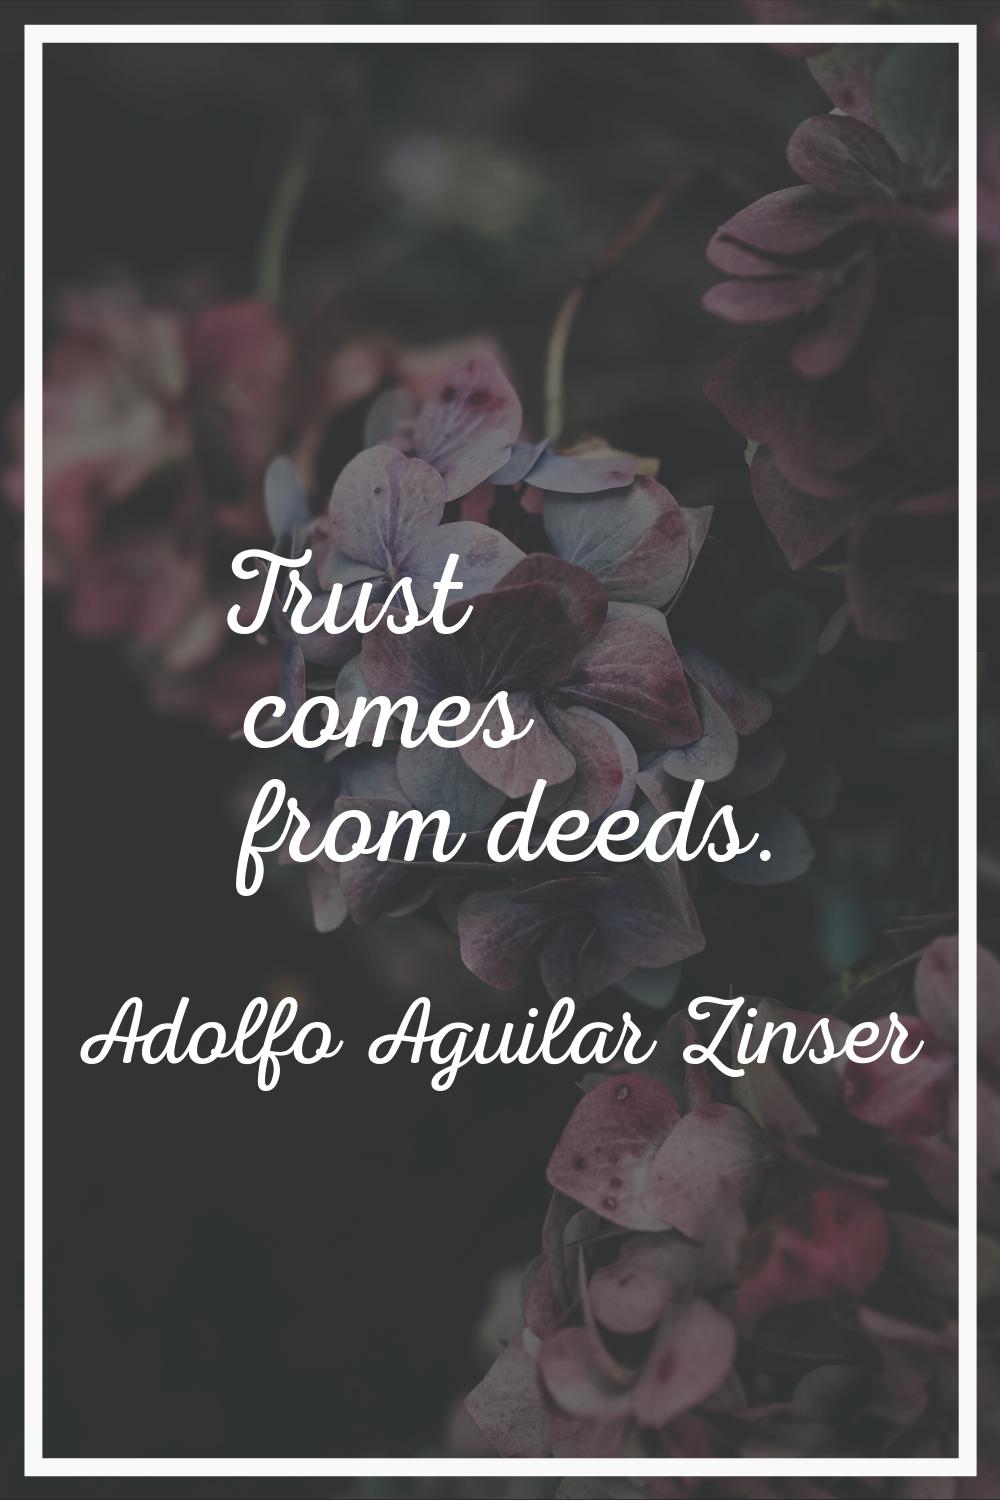 Trust comes from deeds.